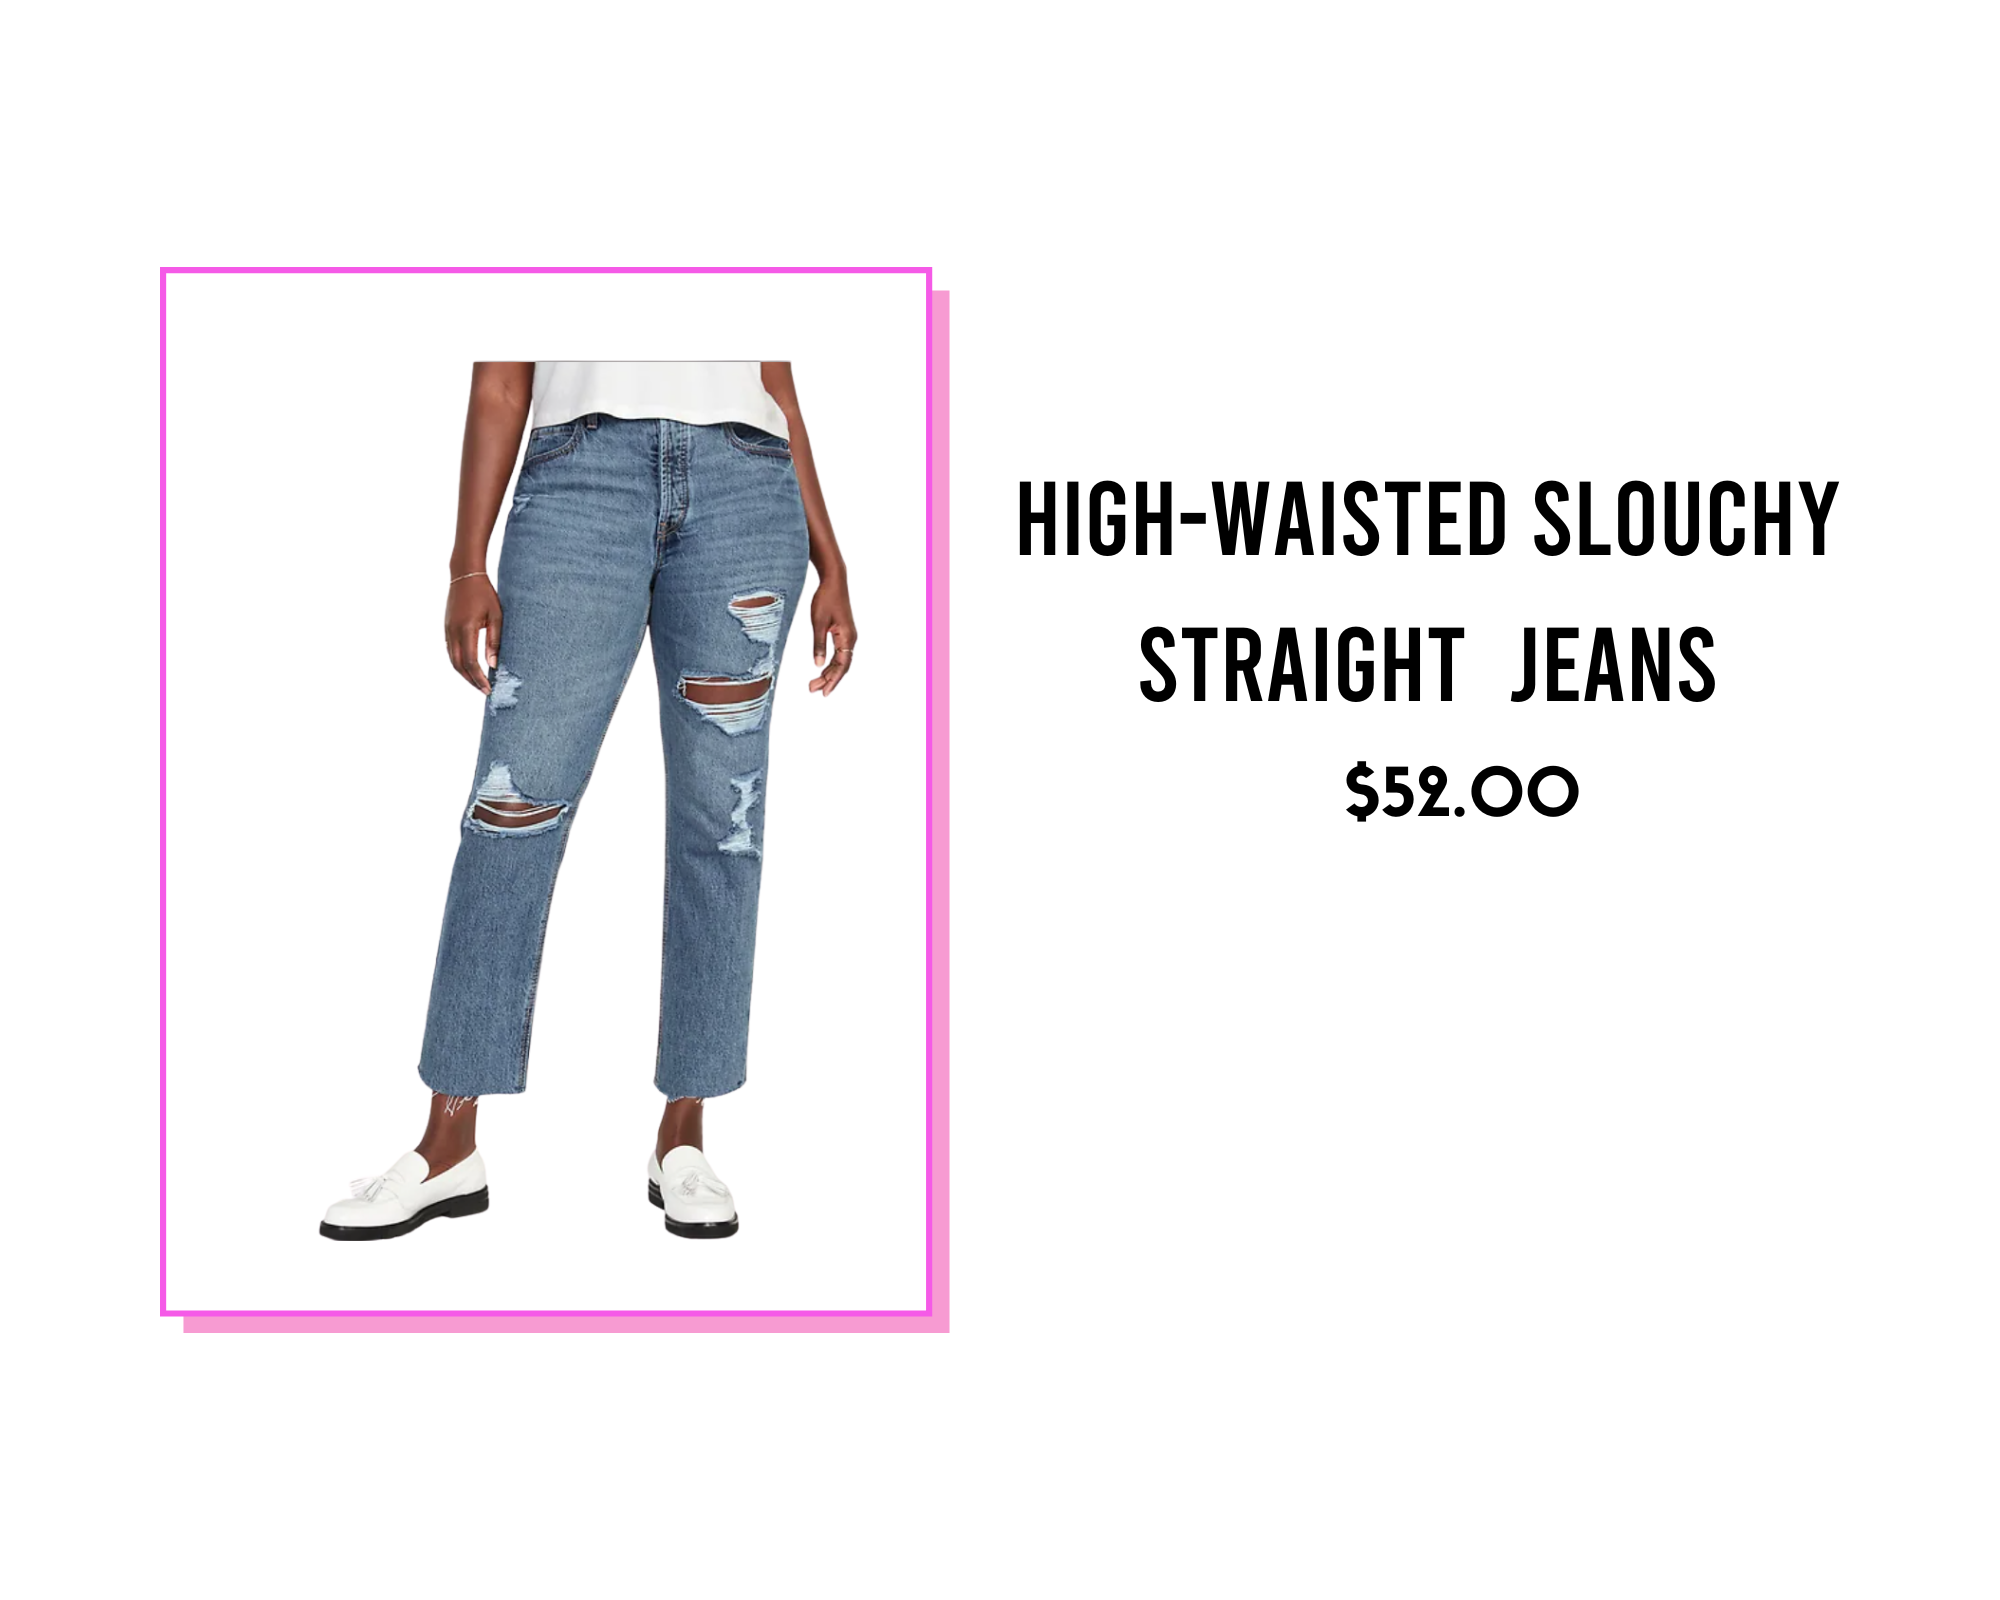 Økologi budget blanding 30 Of The Best Jeans for Thick Thighs – Reviews & Buying Guide — Autum Love